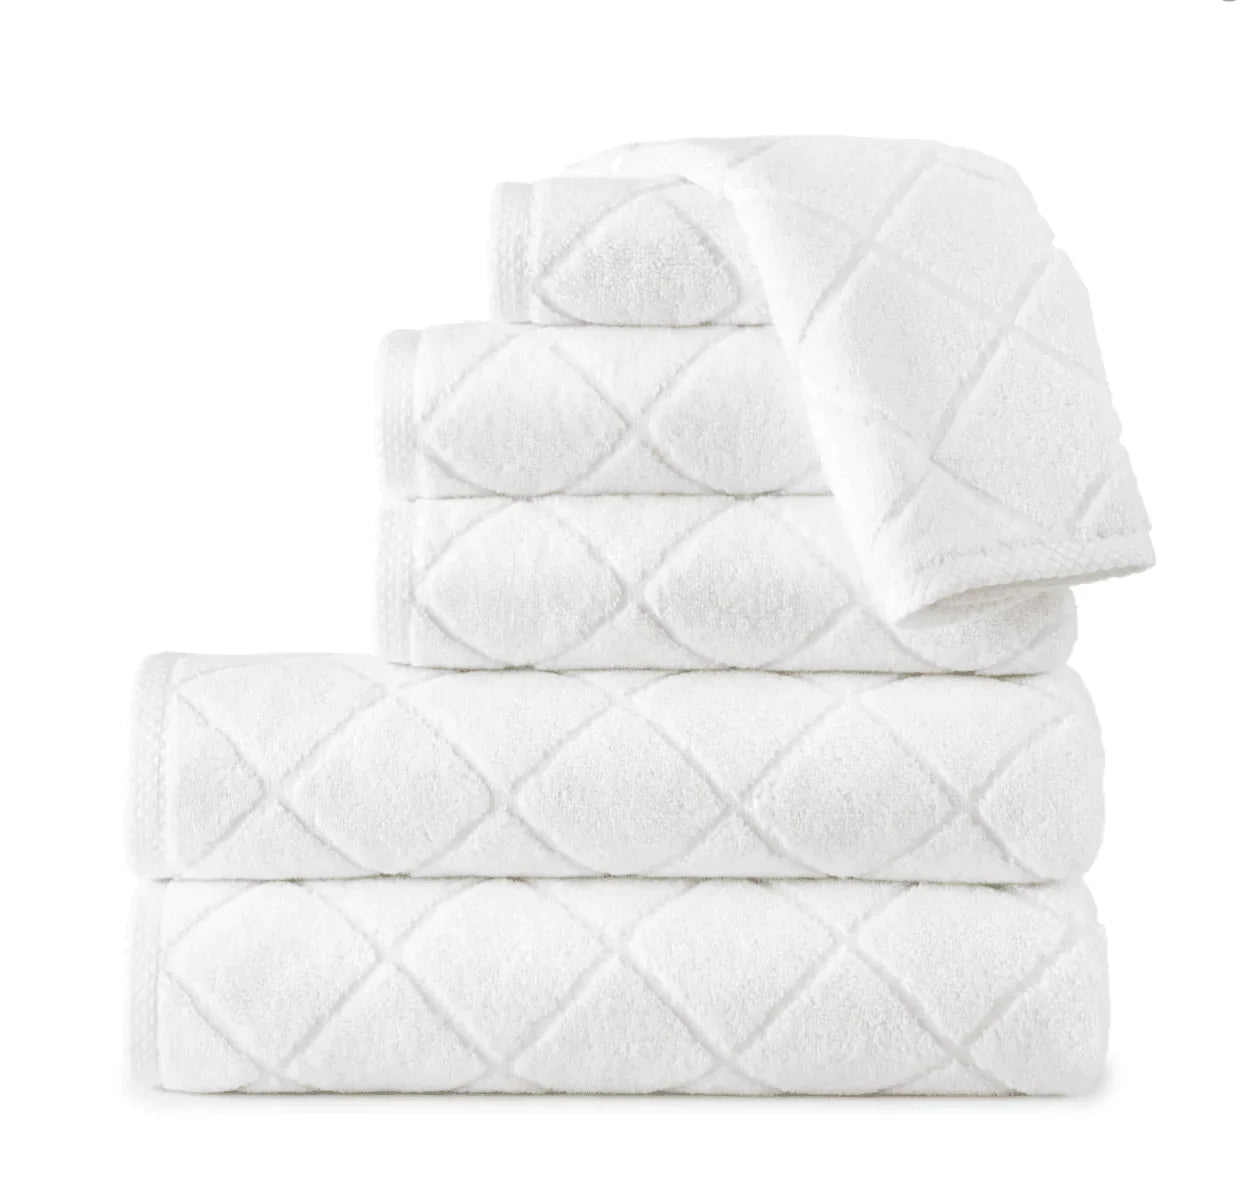 https://www.wellappointedhouse.com/cdn/shop/files/diamond-design-terry-plush-cotton-bath-towel-collection-in-white-bath-towels-the-well-appointed-house_ed79800d-2622-4f96-9744-bc40b935f5d8.webp?v=1691677559